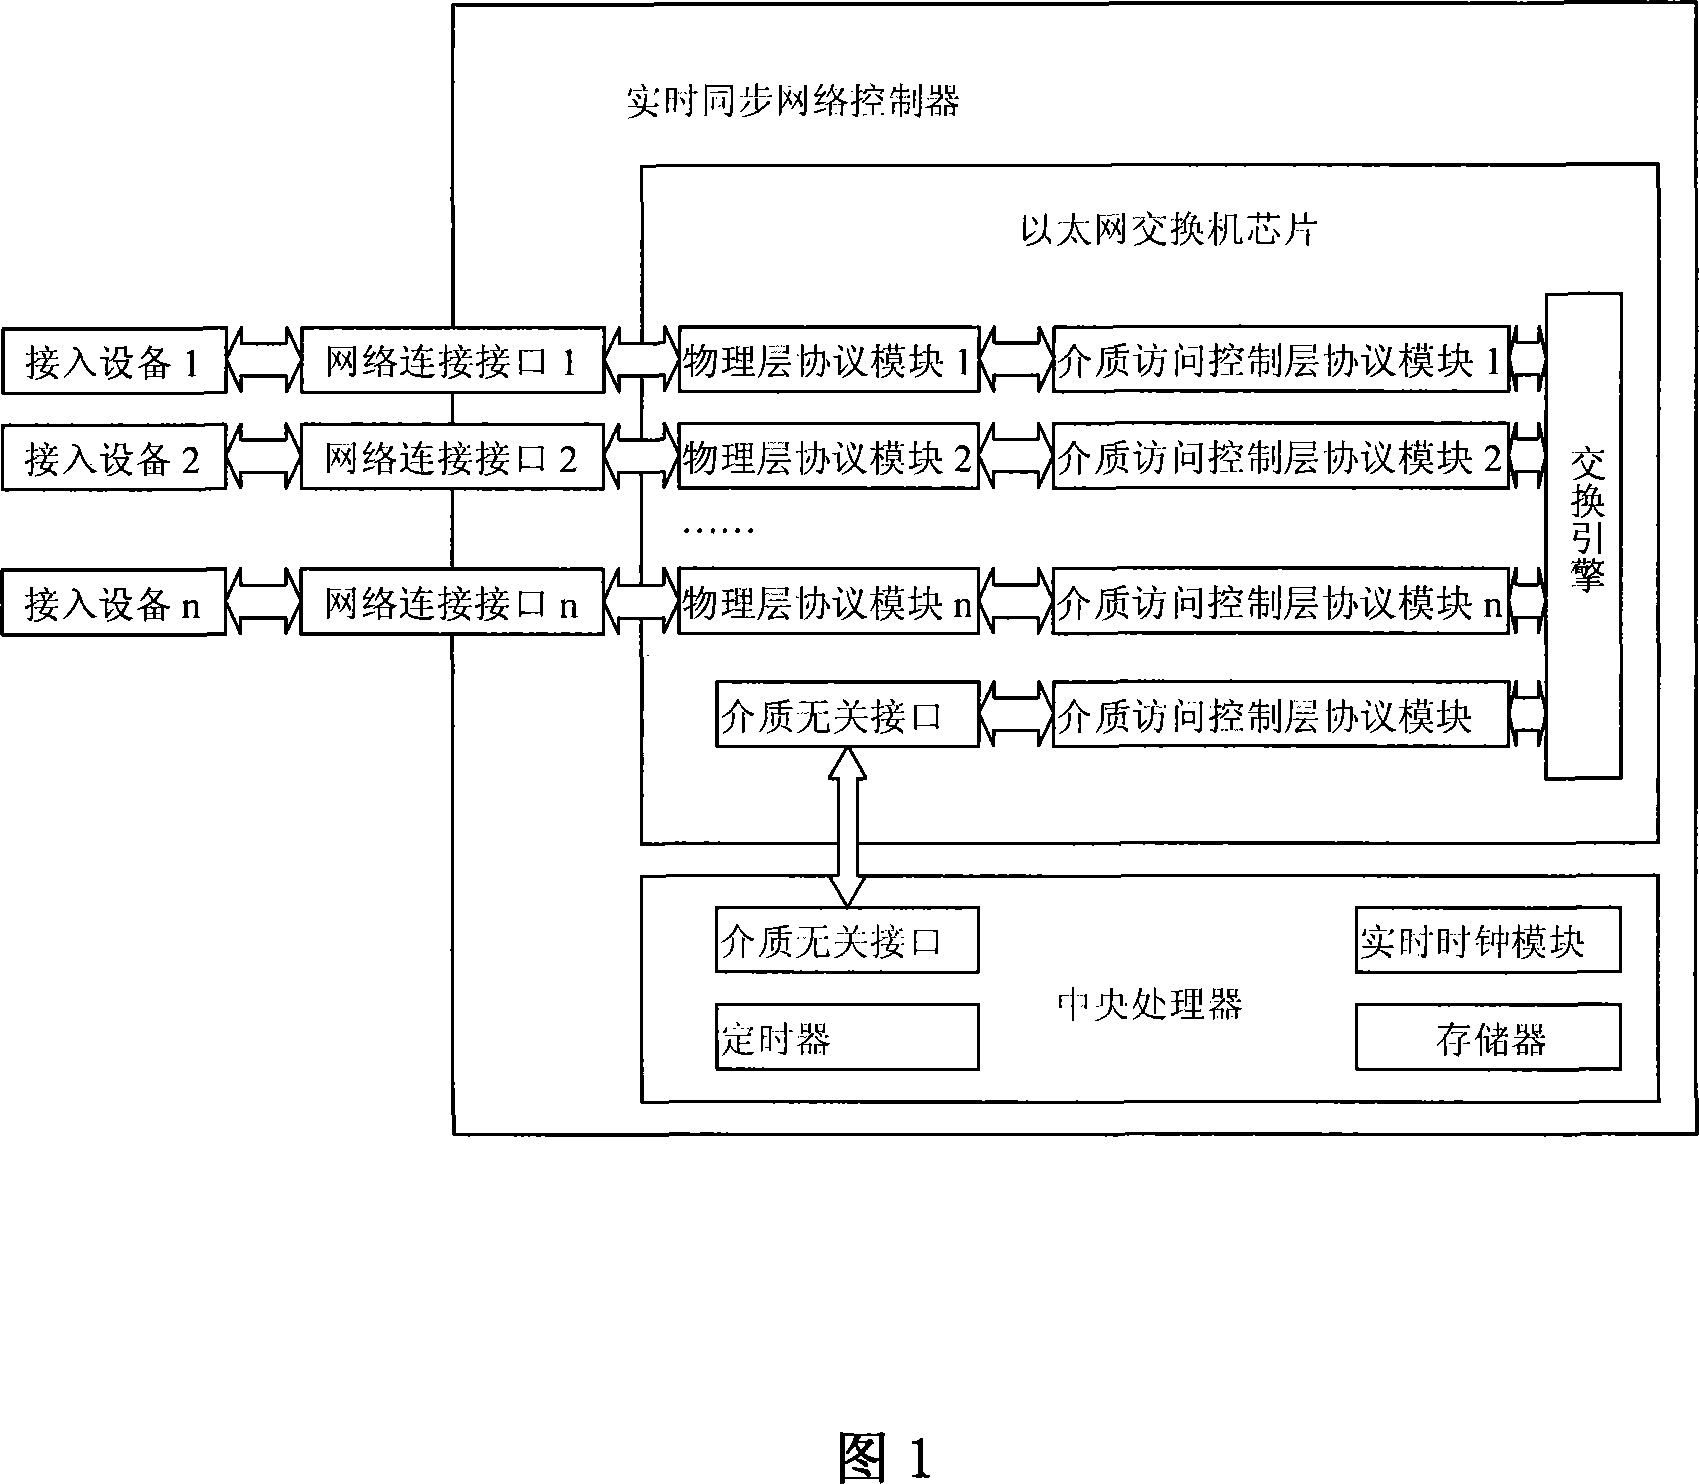 Numerical control system real-time synchronization network controller and communication control method